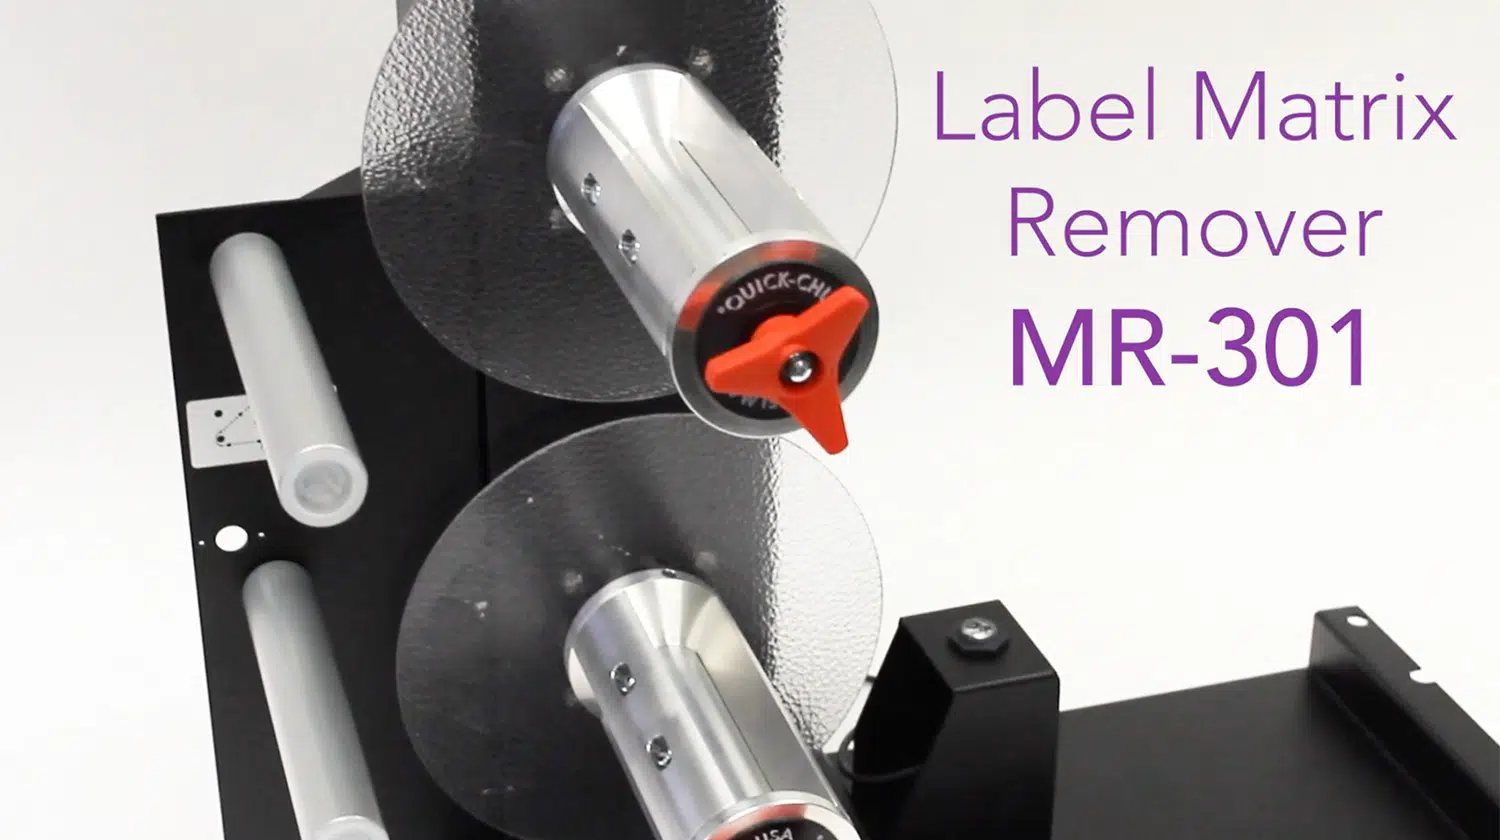 Introducing the MR-301 Matrix Remover